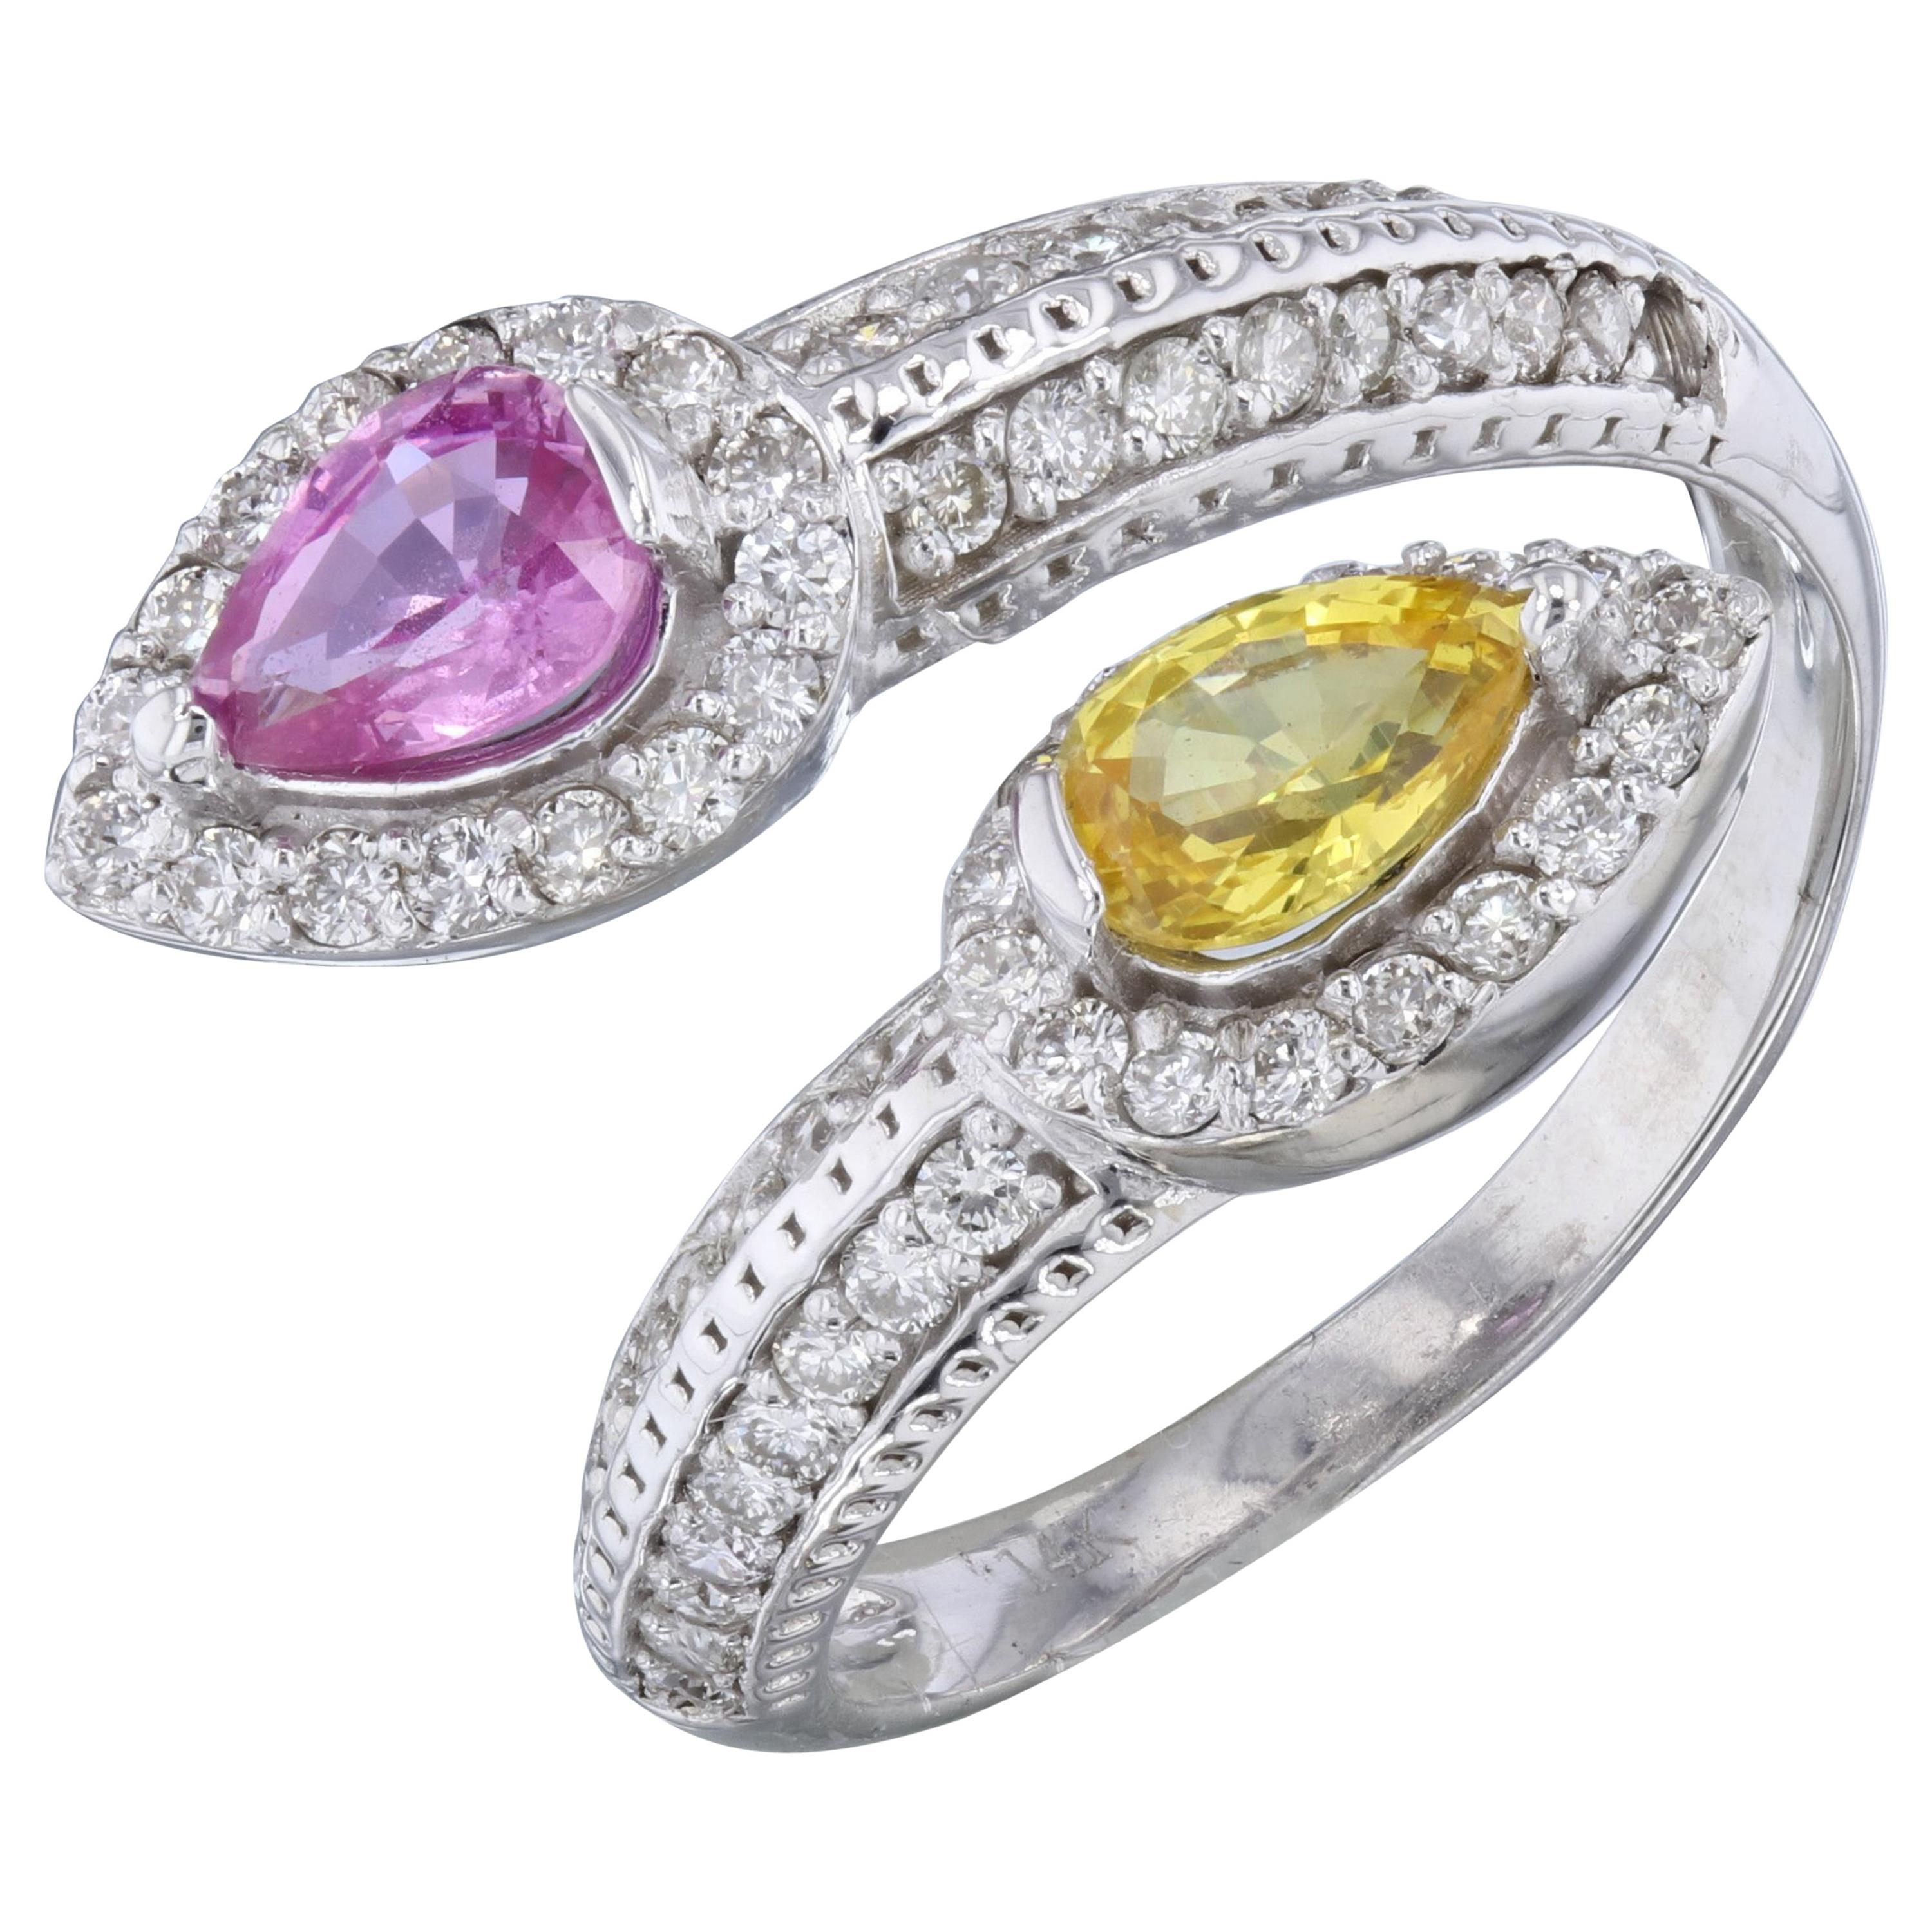 1.56 Carat Pink and Yellow Sapphire Diamond Cocktail Ring